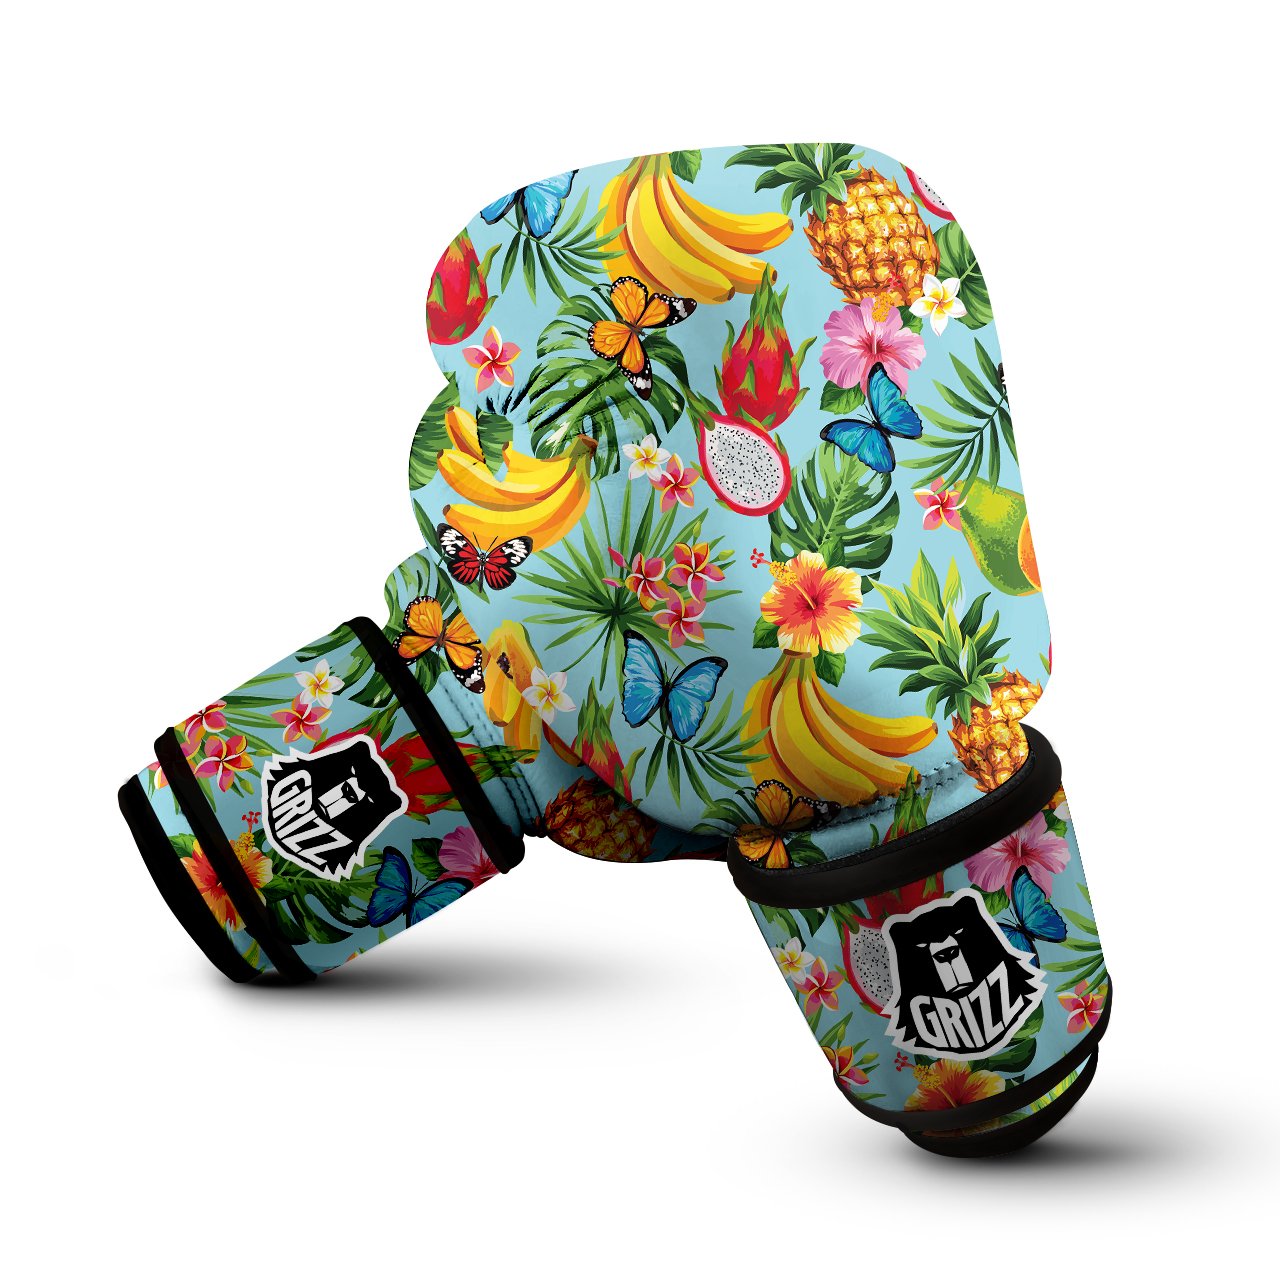 Fruits Jungle Tropical Print Pattern Boxing Gloves-grizzshop